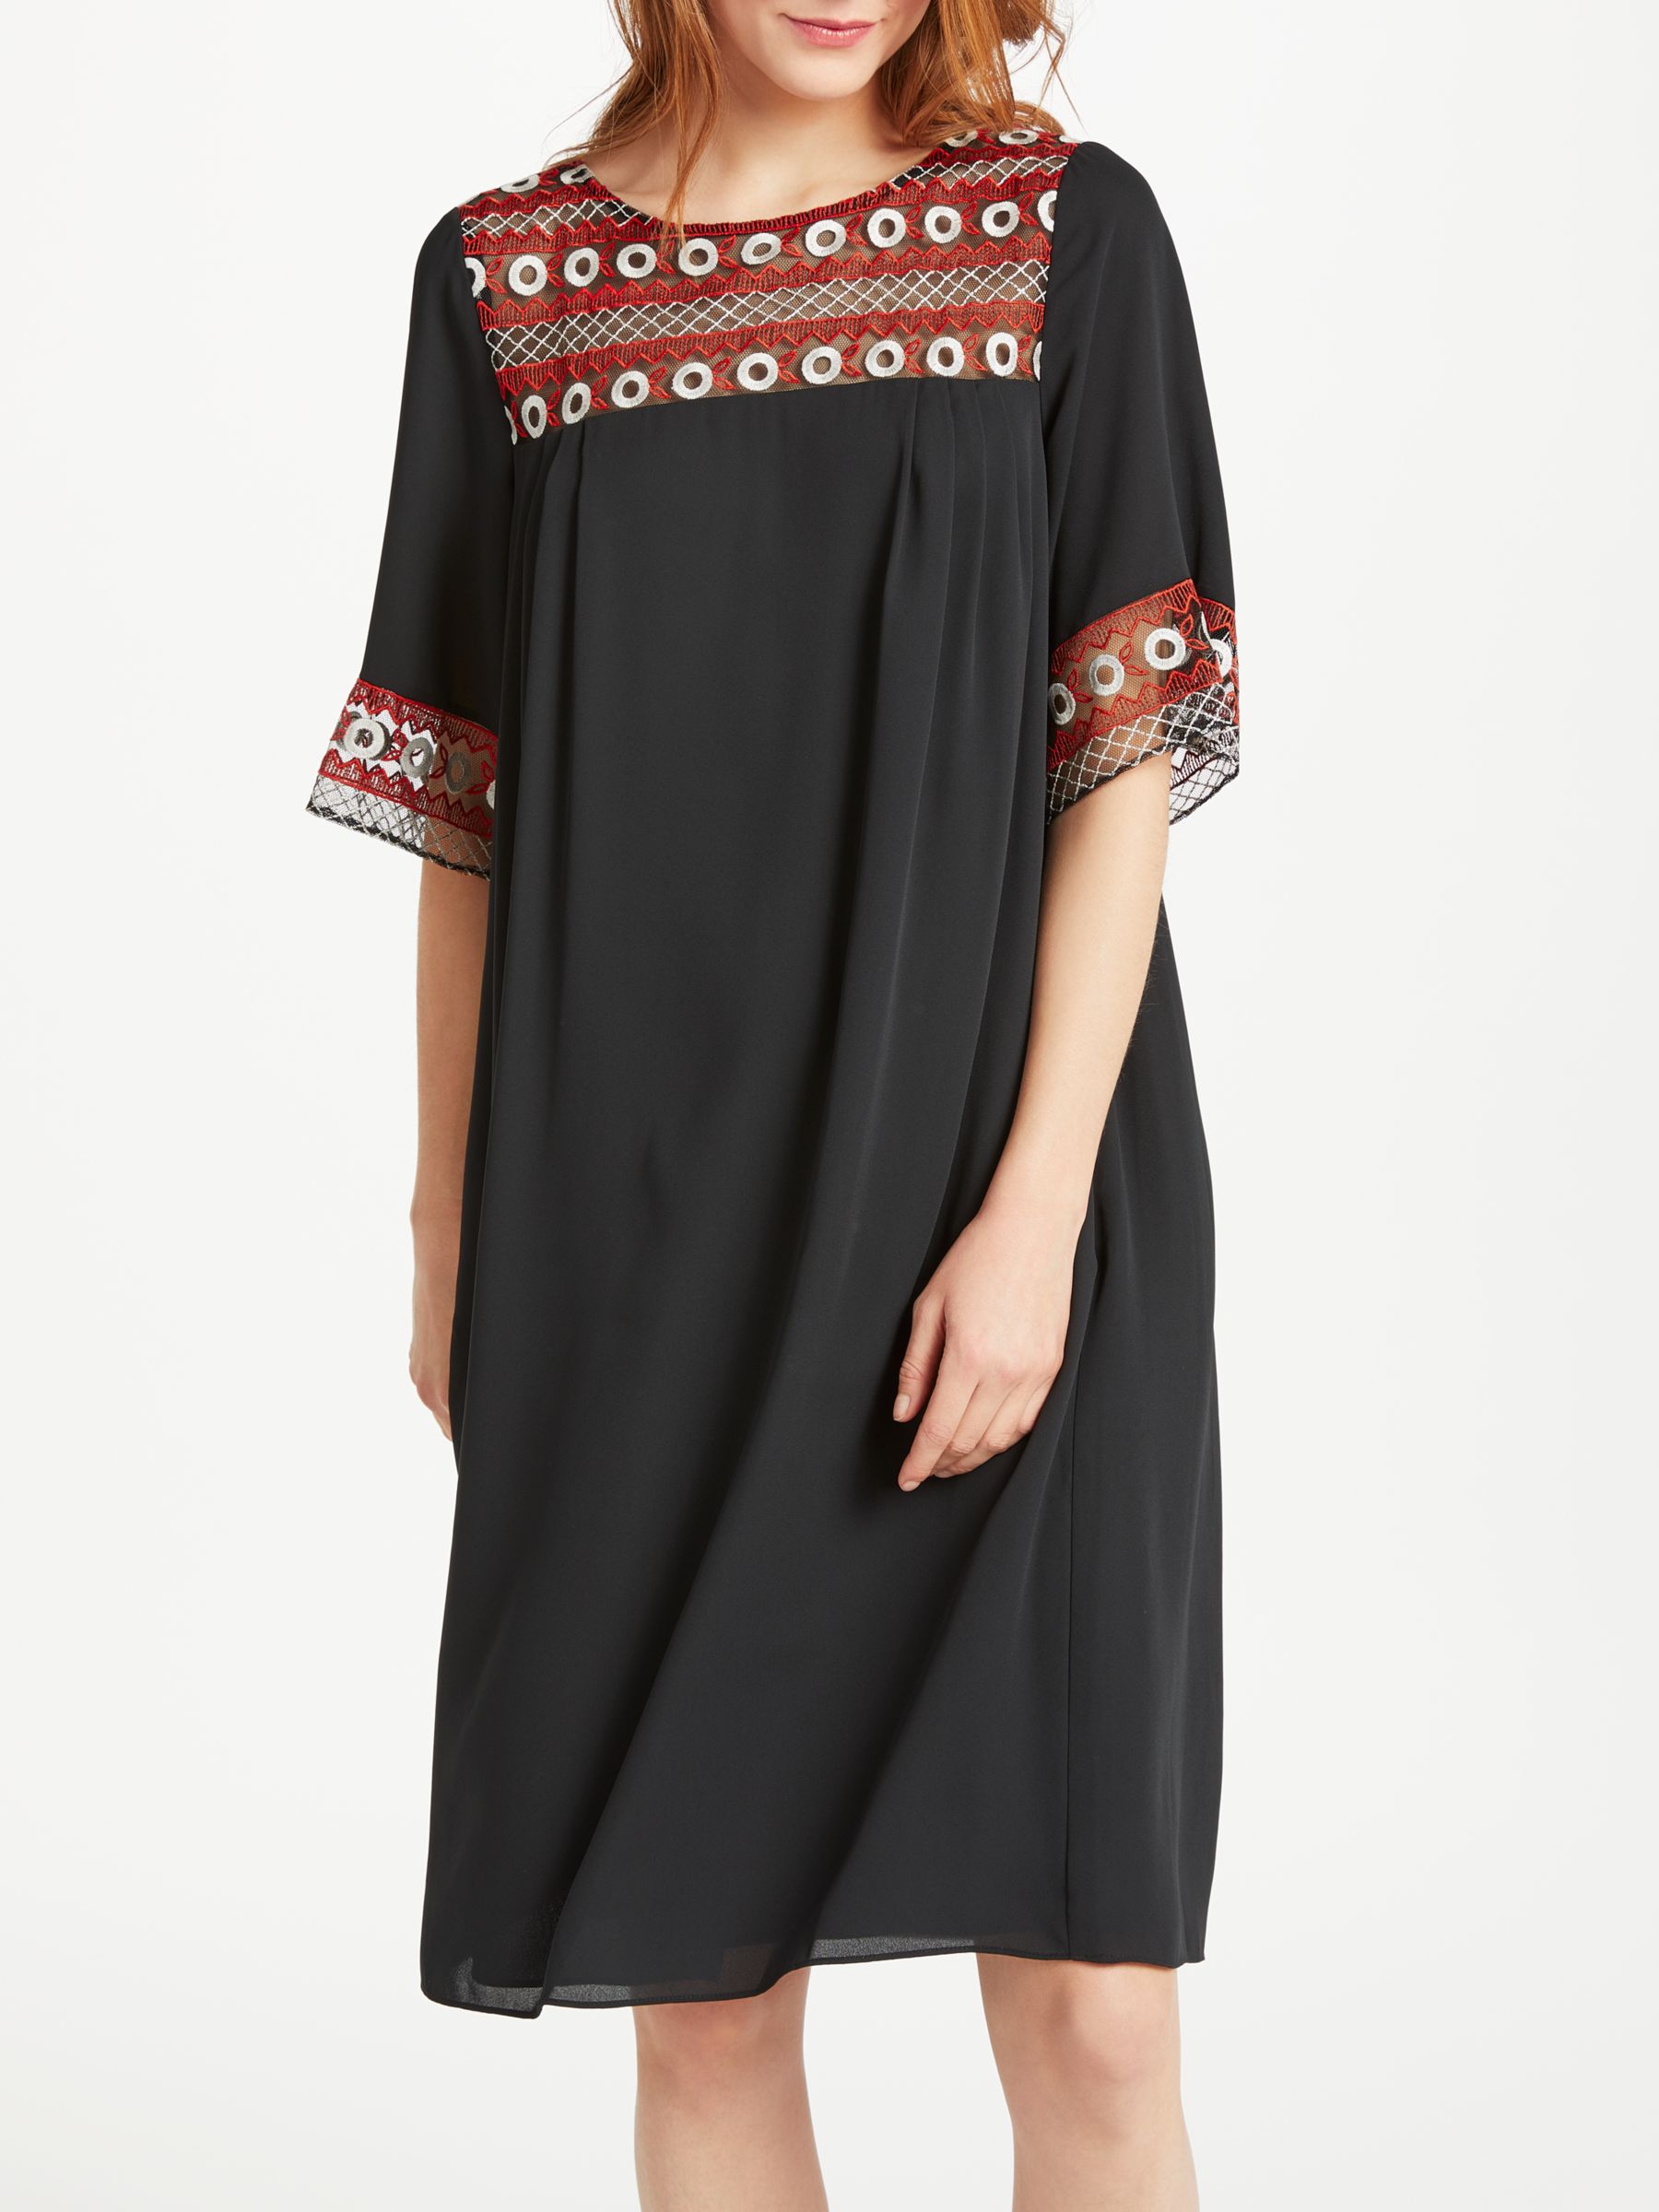 Somerset by Alice Temperley Embroidered Circles Tunic Dress, Black, 8